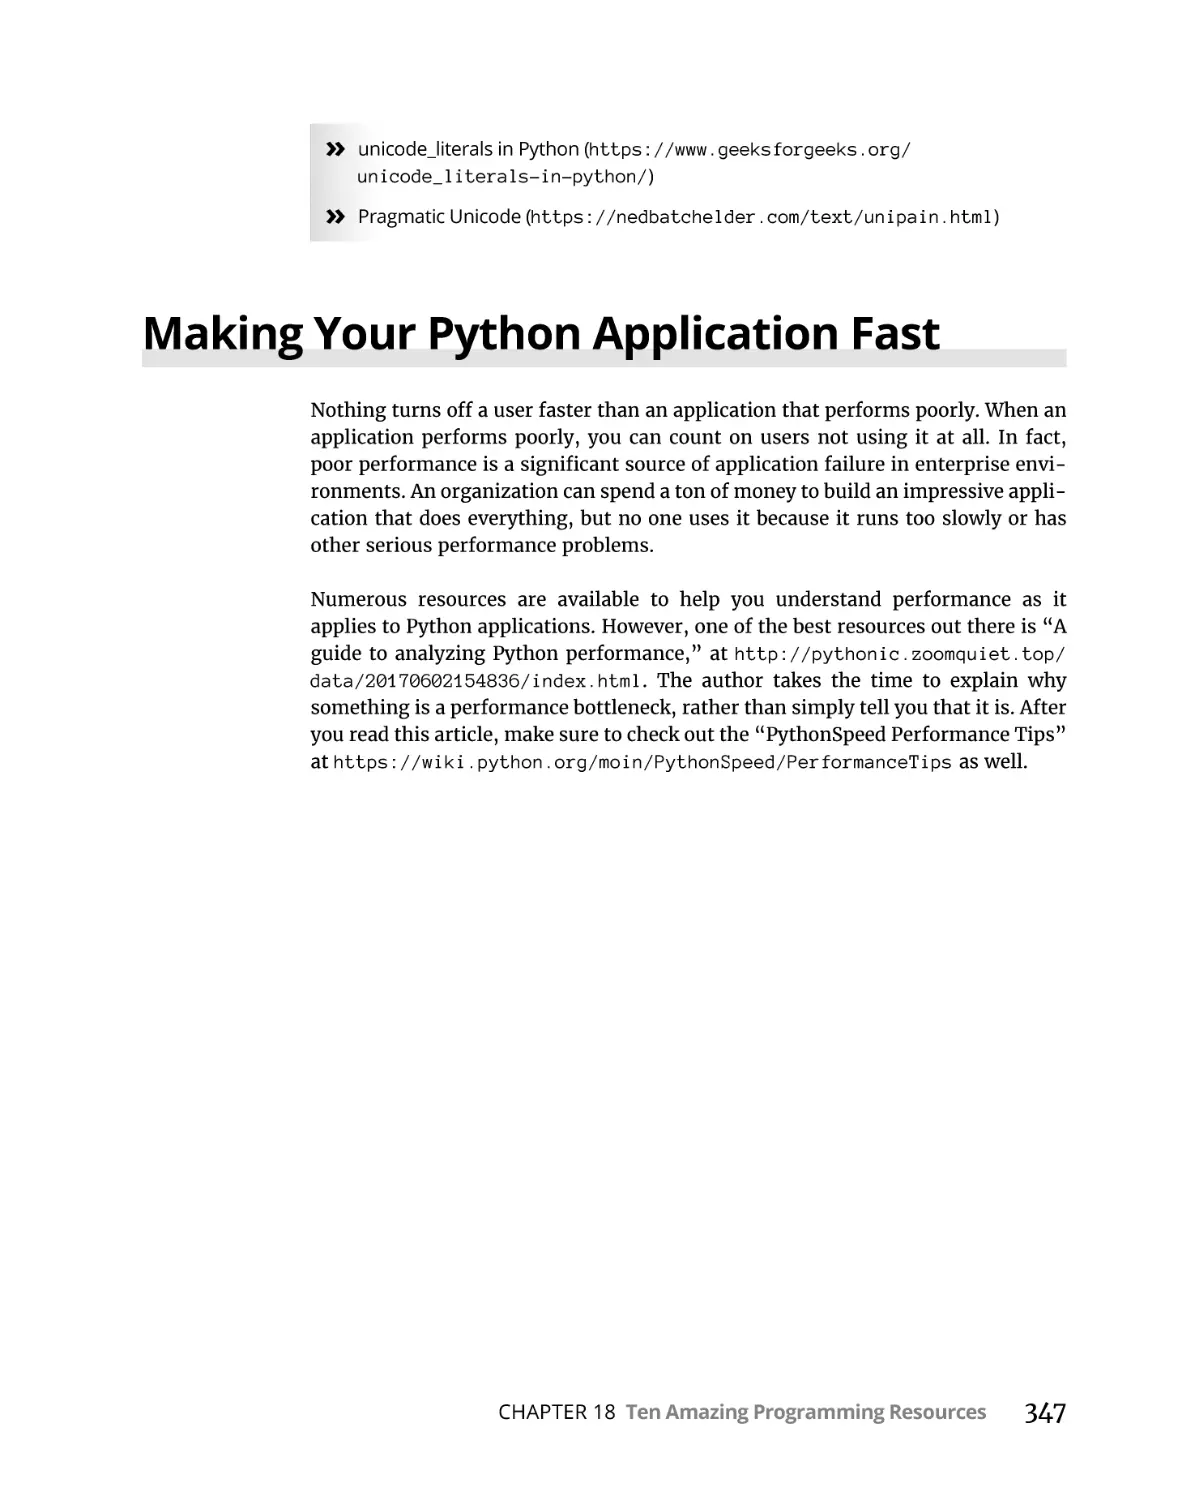 Making Your Python Application Fast